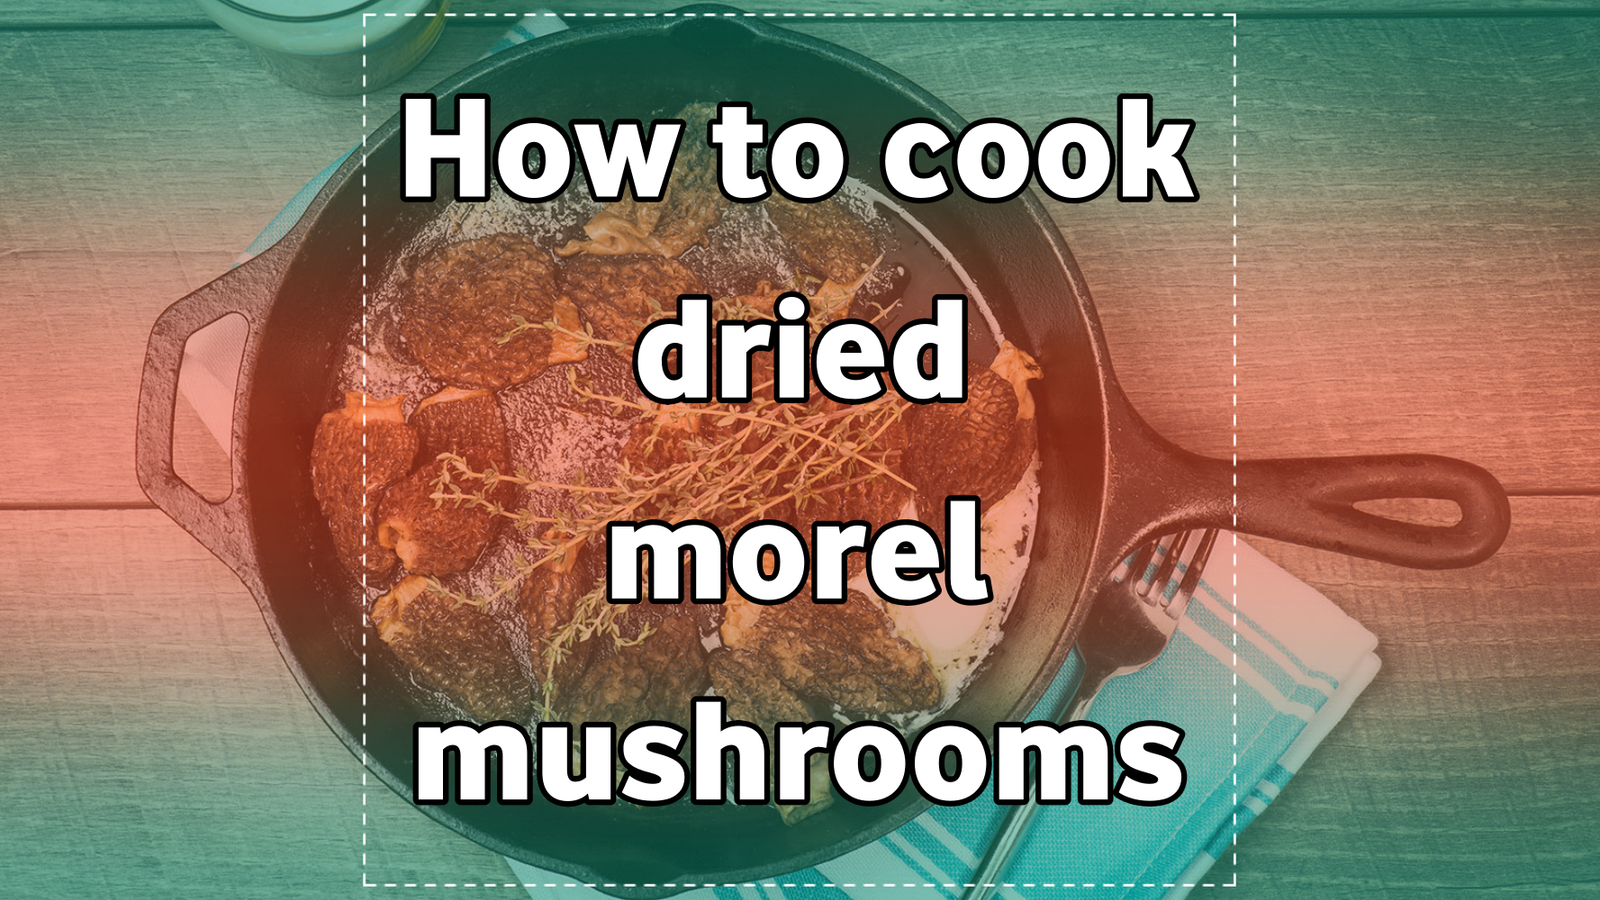 How to cook dried morel mushrooms